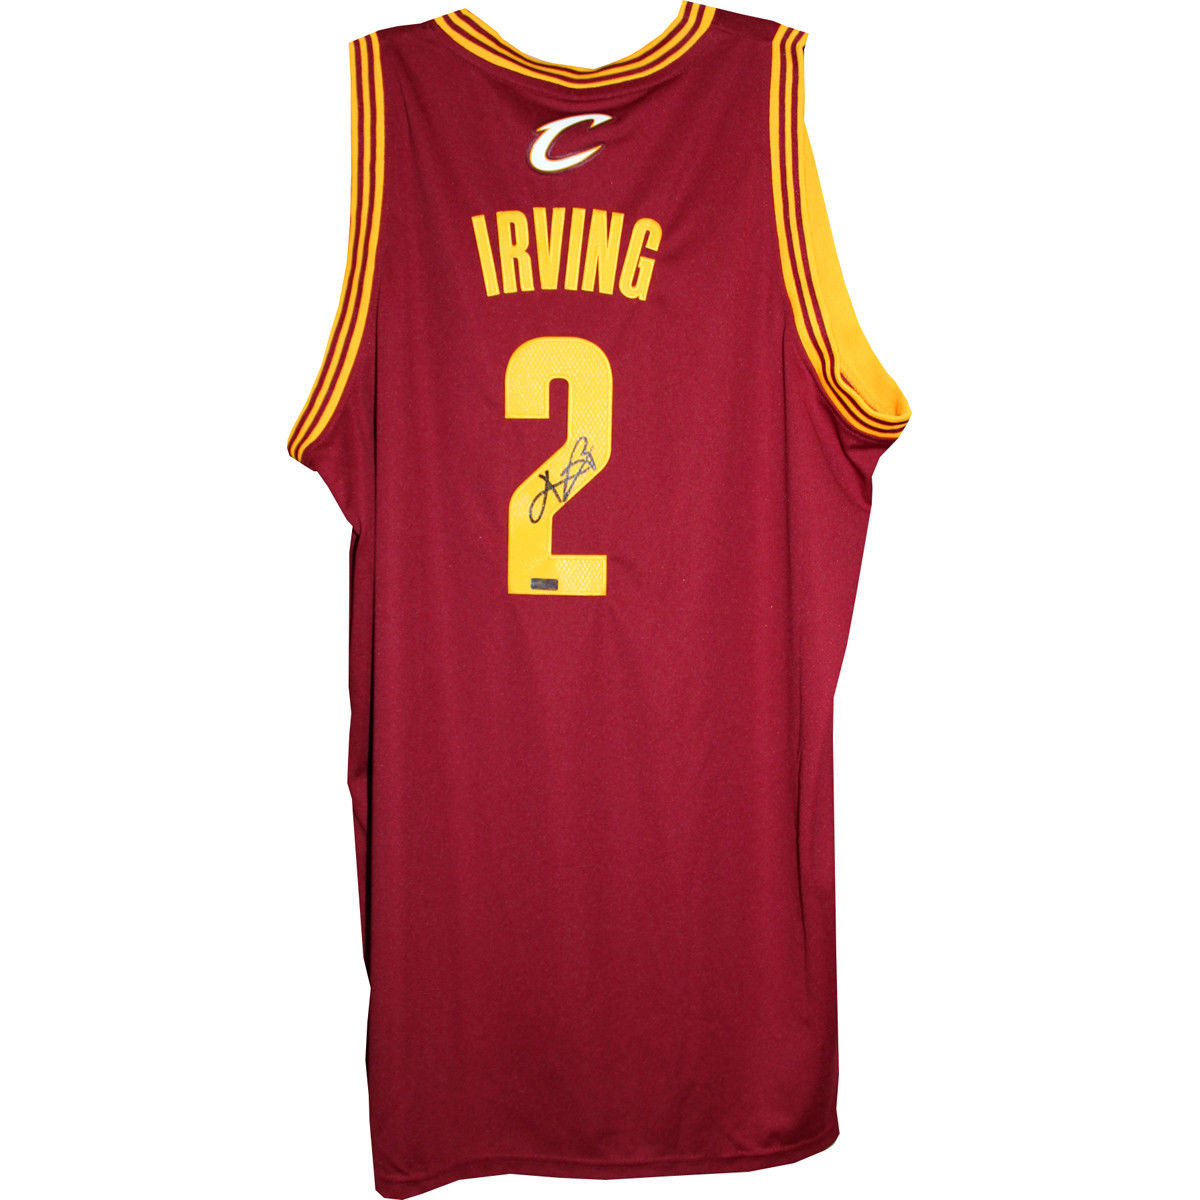 Kyrie Irving Signed Cavaliers Jersey Inscribed 15-16 NBA Champ (Panini  COA)